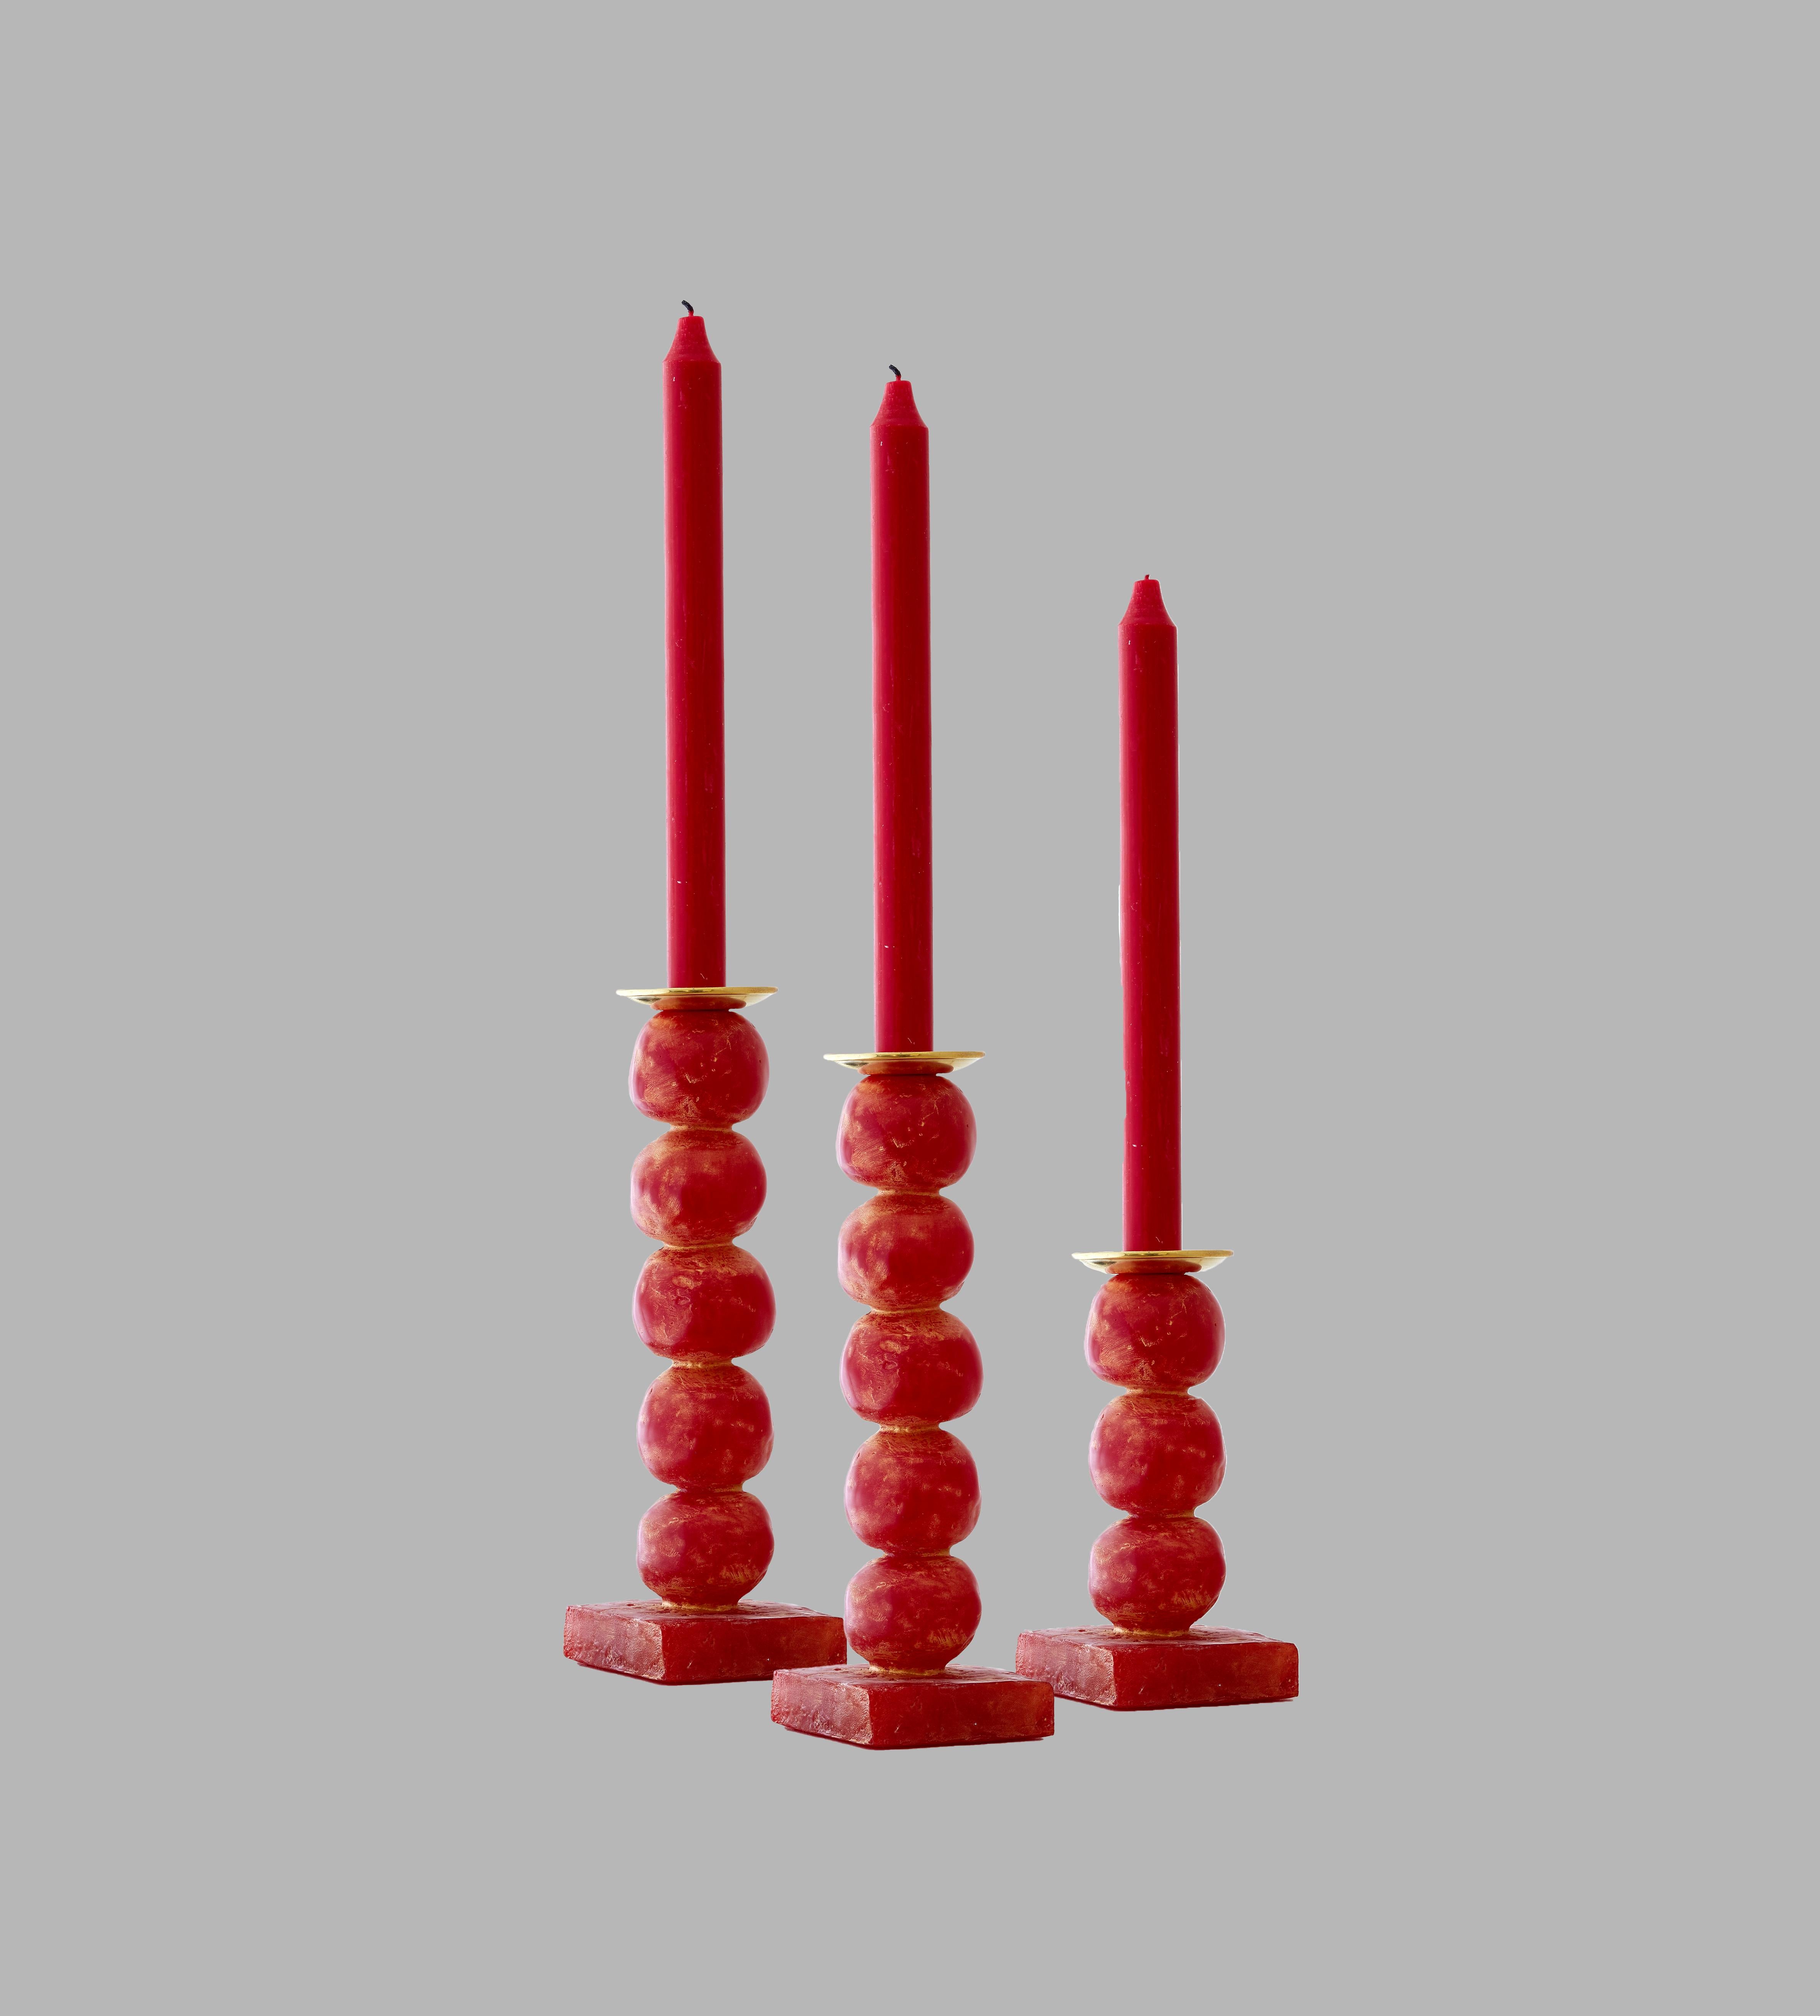 Margit Wittig has used her sculptural skills to create beautifully-crafted, well-proportioned contemporary candlesticks, which are compositions of her unique signature pearl-shaped designs.

Each candlestick begins as hand-sculpted spheres which are